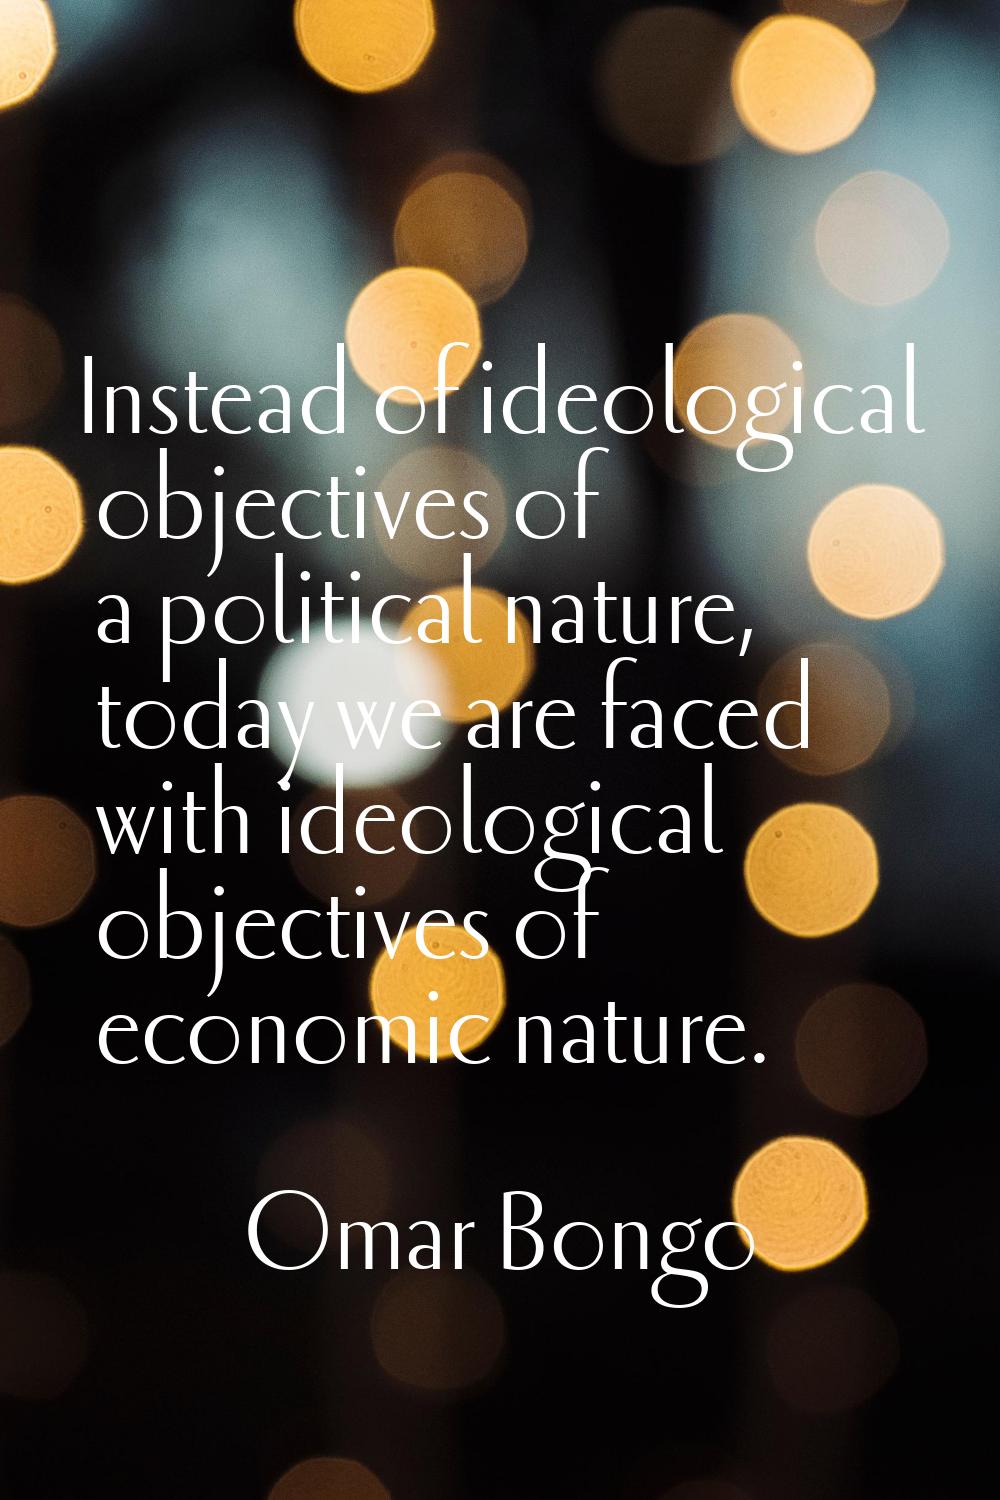 Instead of ideological objectives of a political nature, today we are faced with ideological object